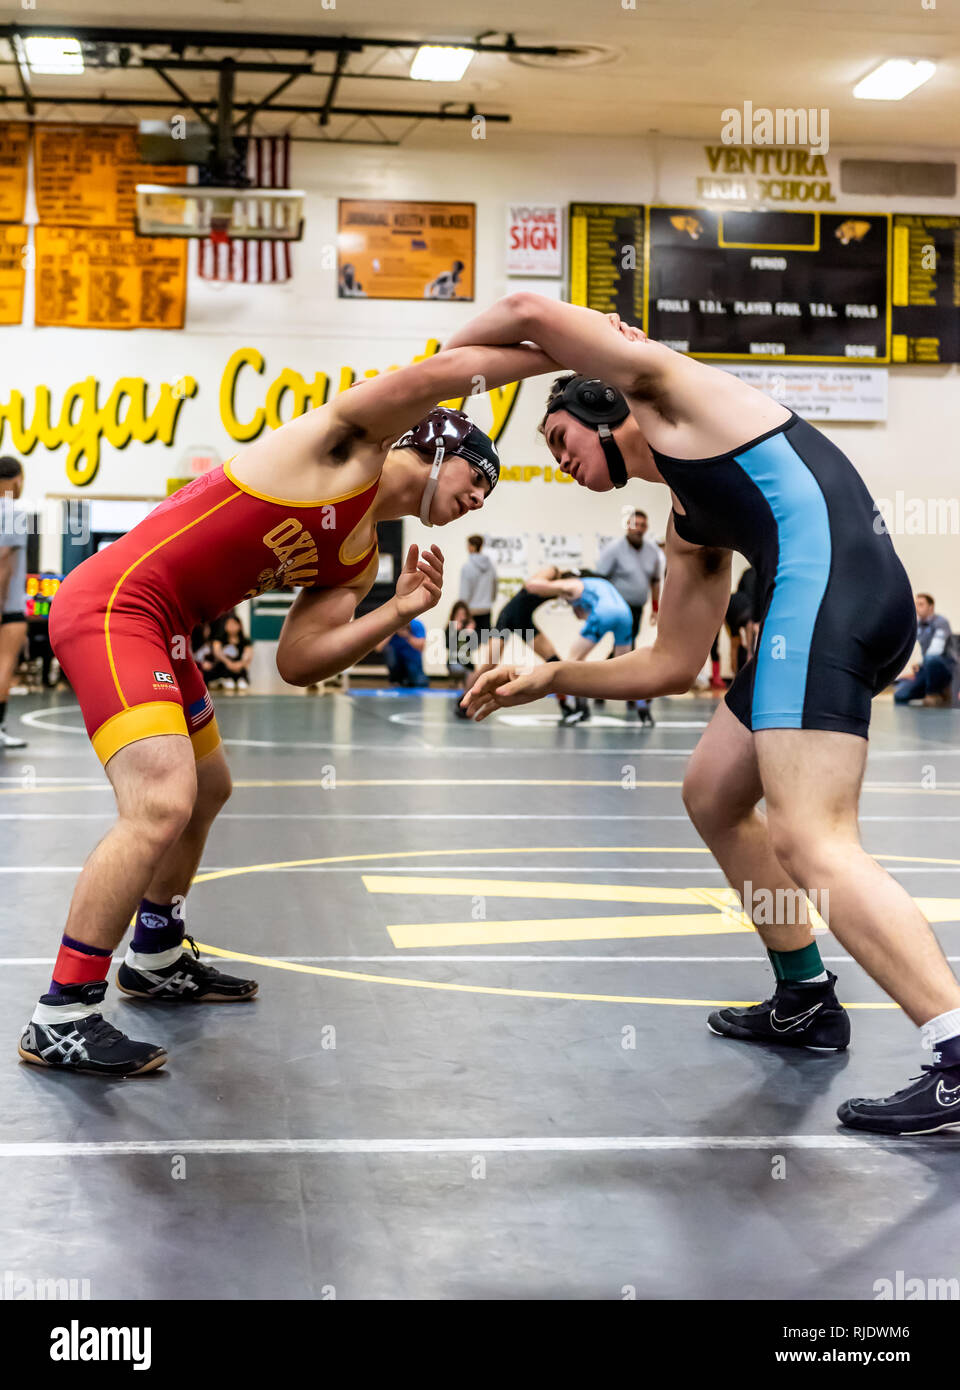 Wrestler from Oxnard High School attempting to gain advantage on feet against Buena athlete during tournament at Ventura High School in California USA Stock Photo